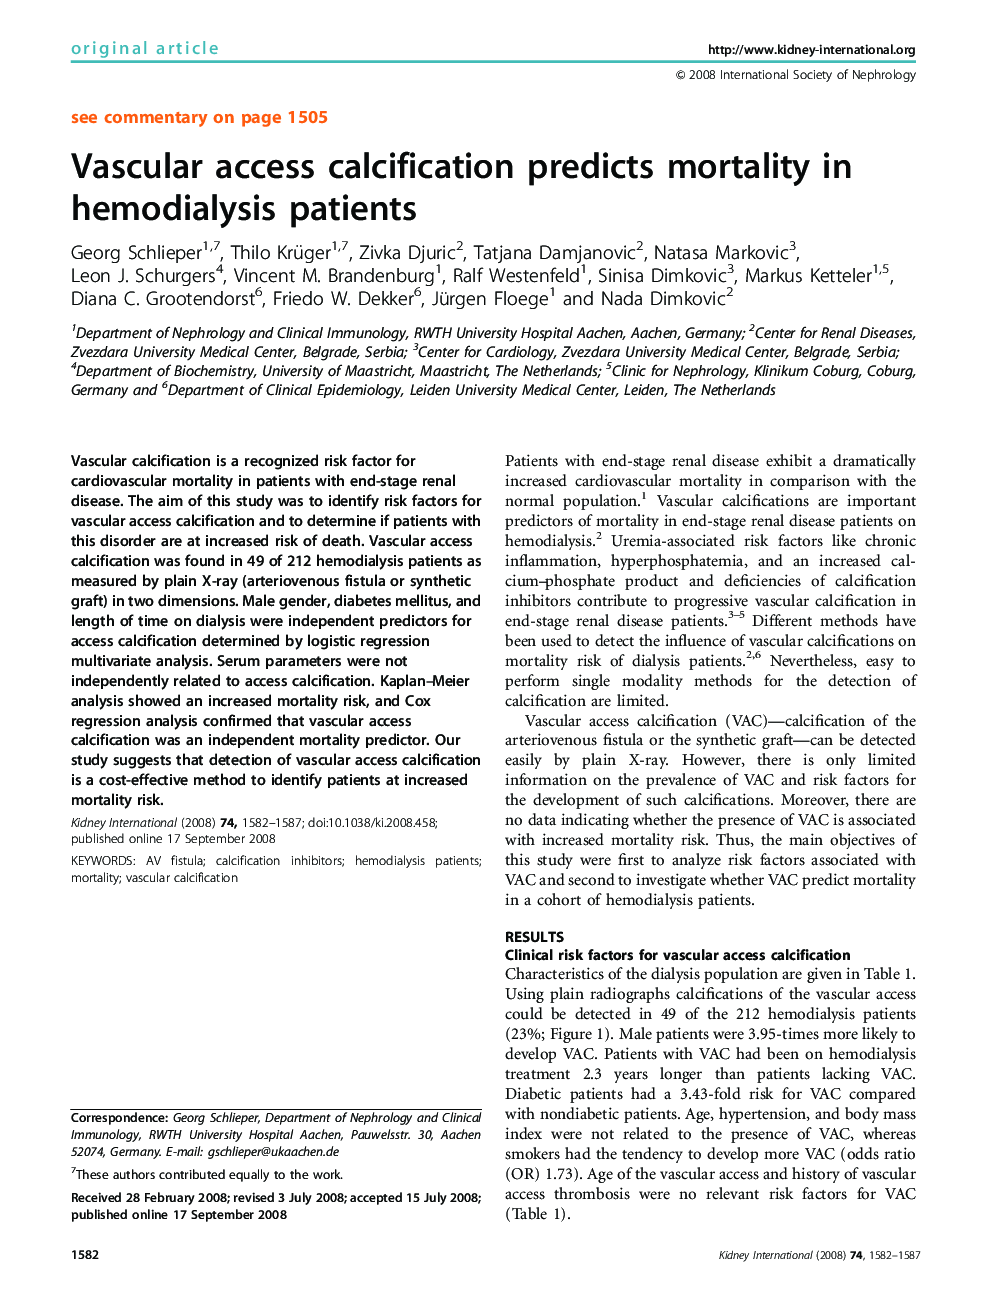 Vascular access calcification predicts mortality in hemodialysis patients